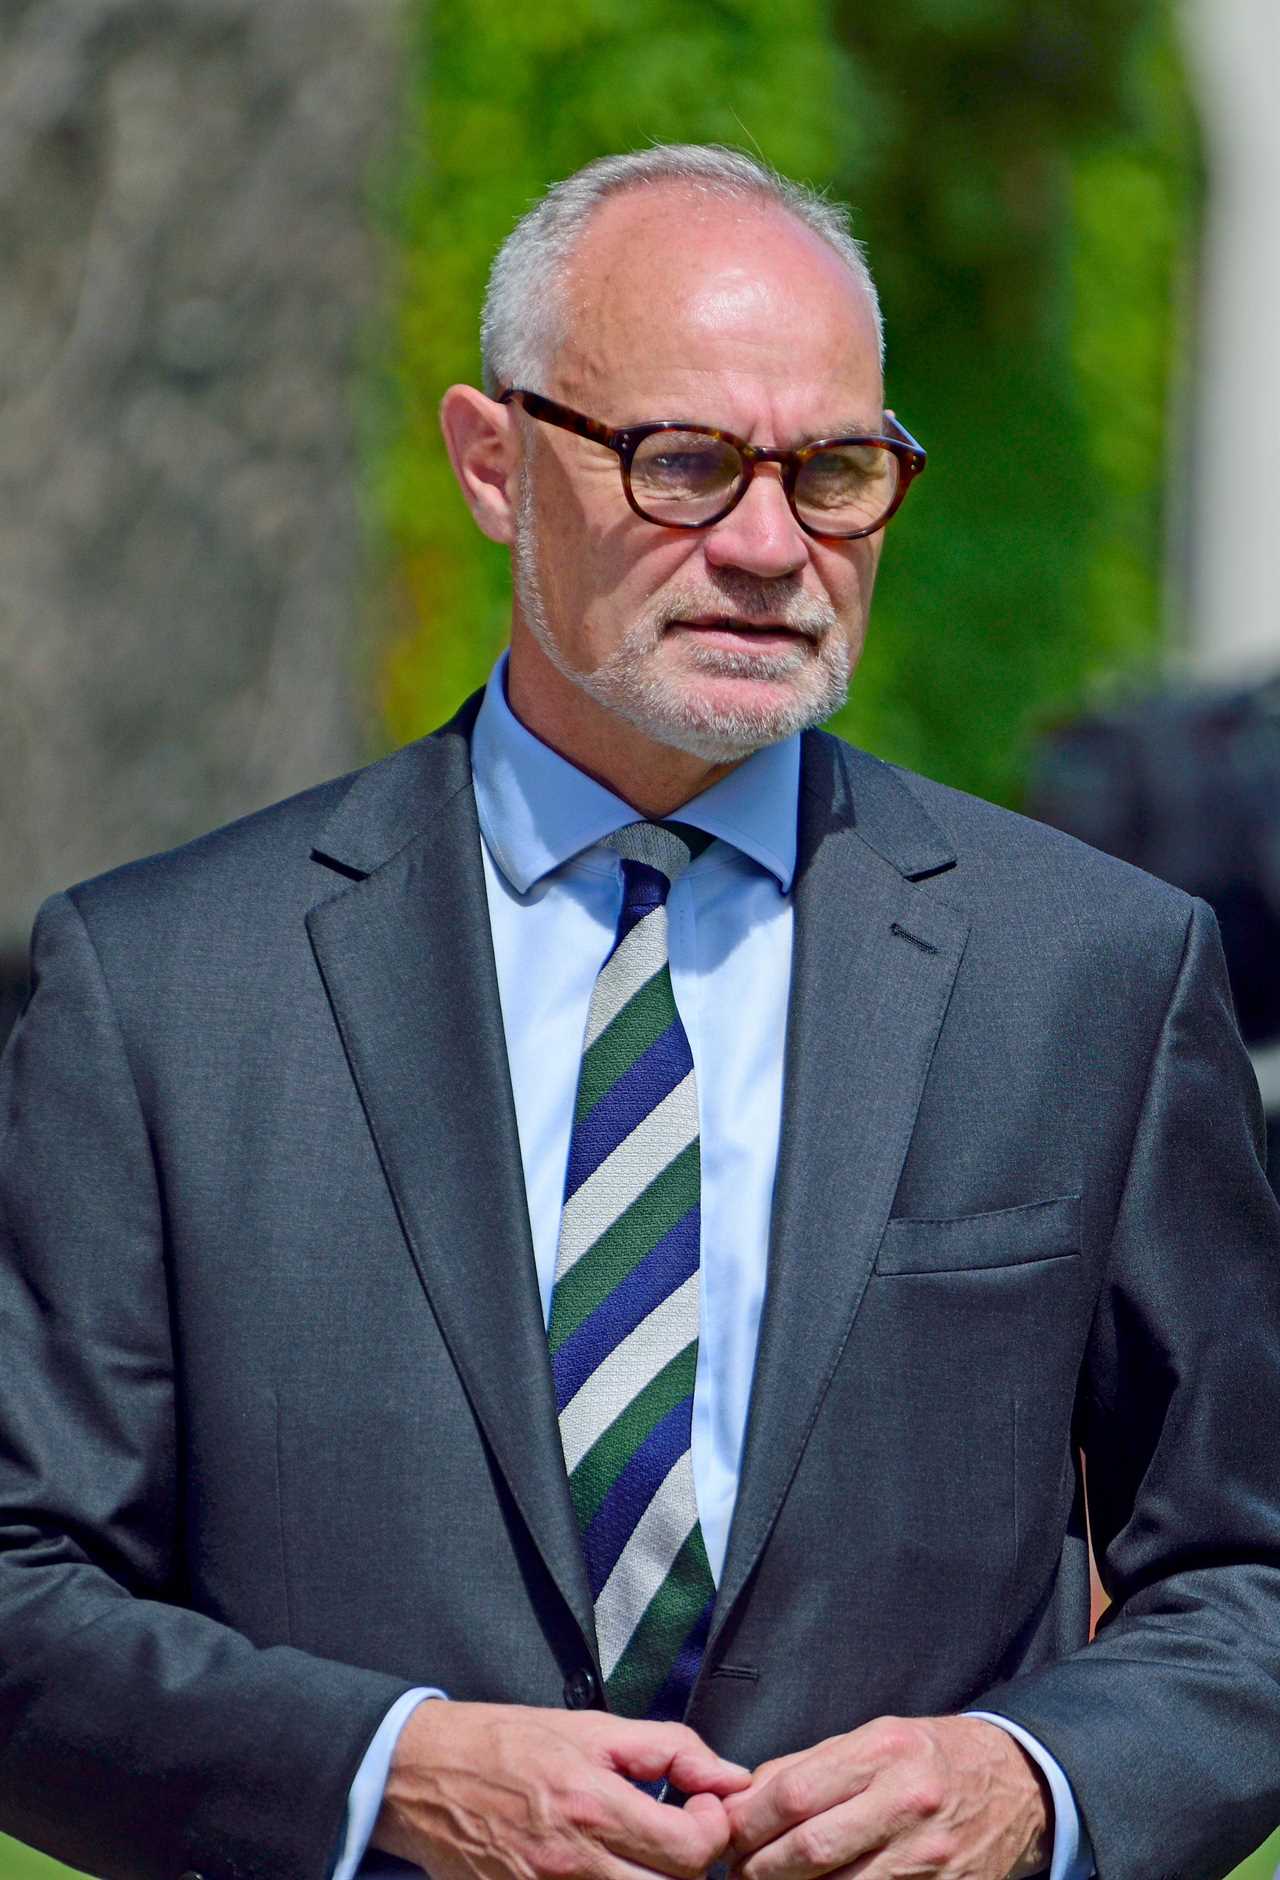 Tory MP Crispin Blunt reveals he was arrested for rape